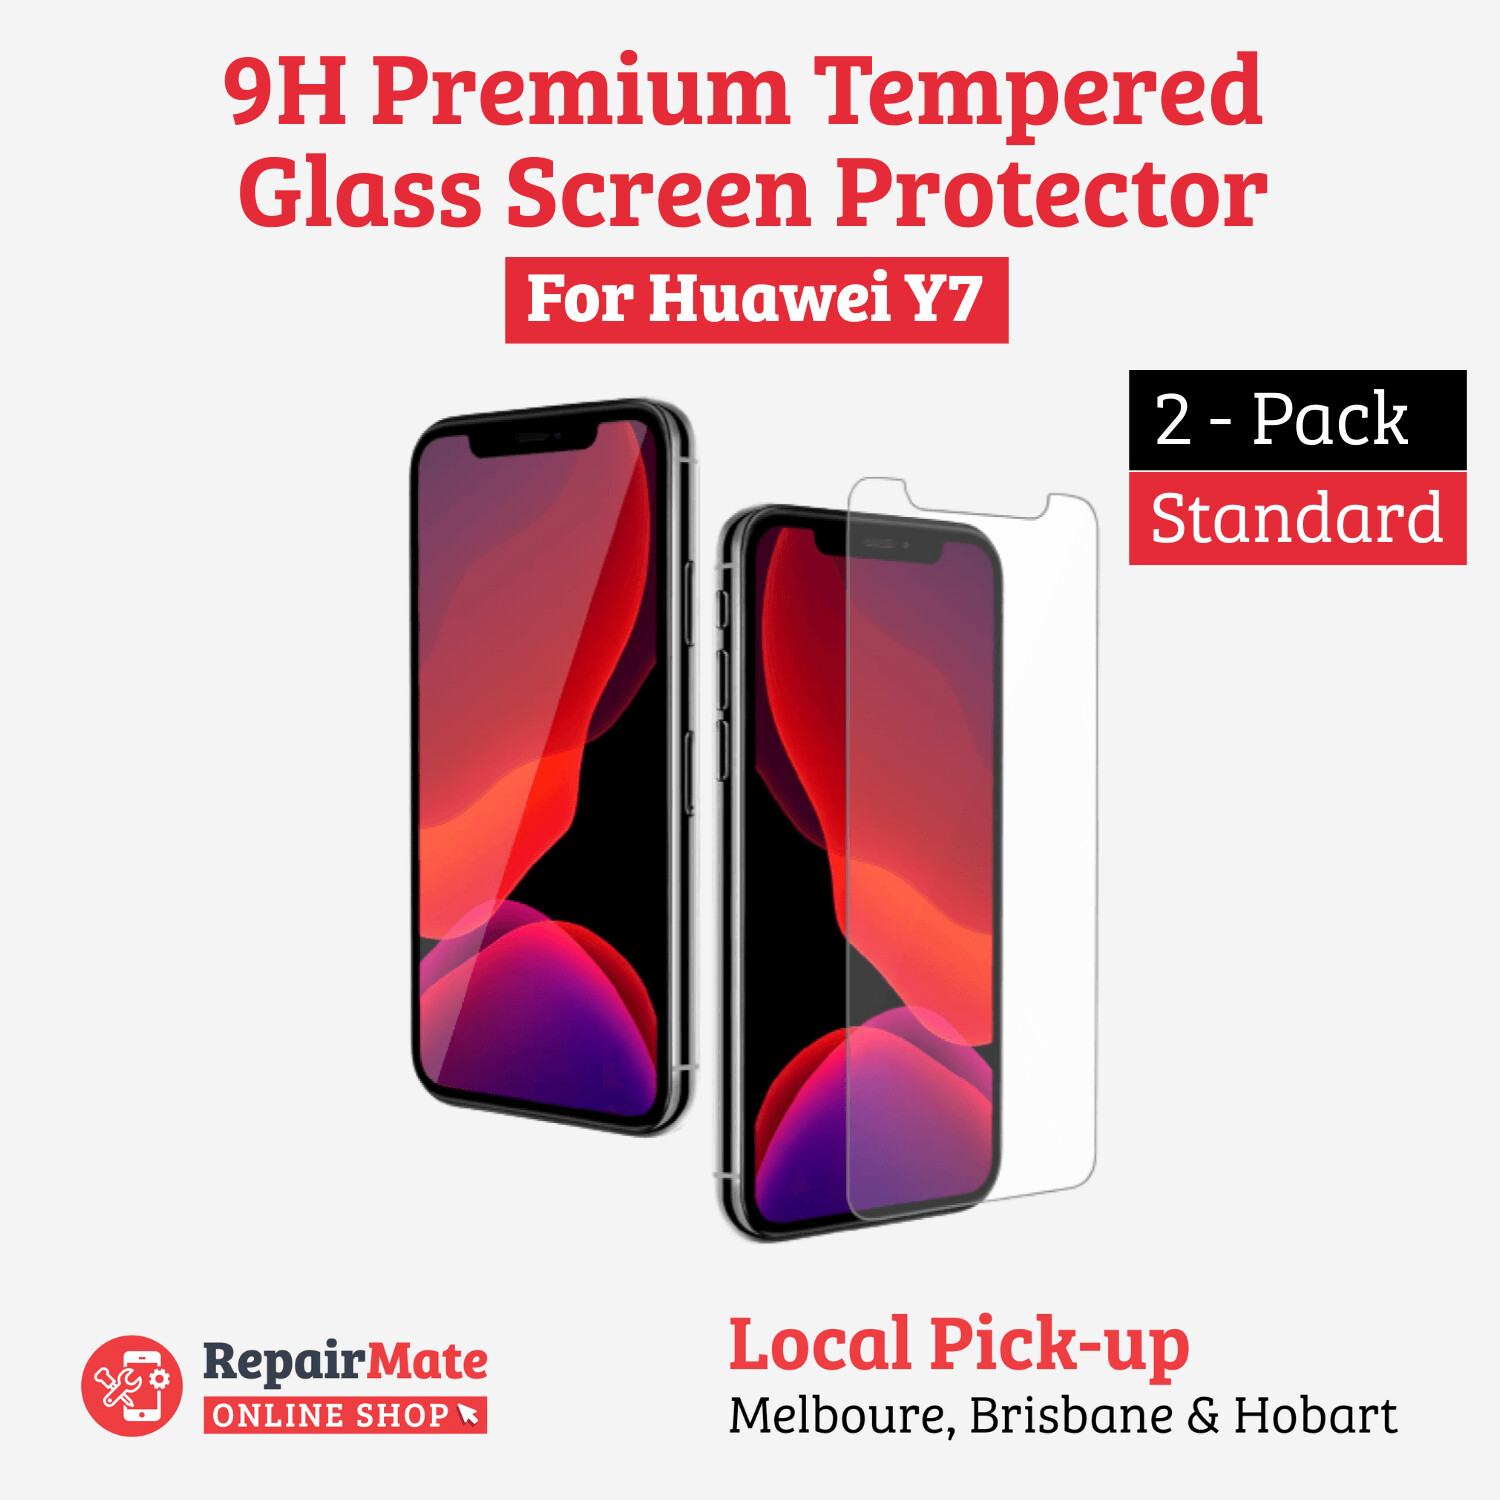 Huawei Y7 Prime 9H Premium Tempered Glass Screen Protector [2 Pack]